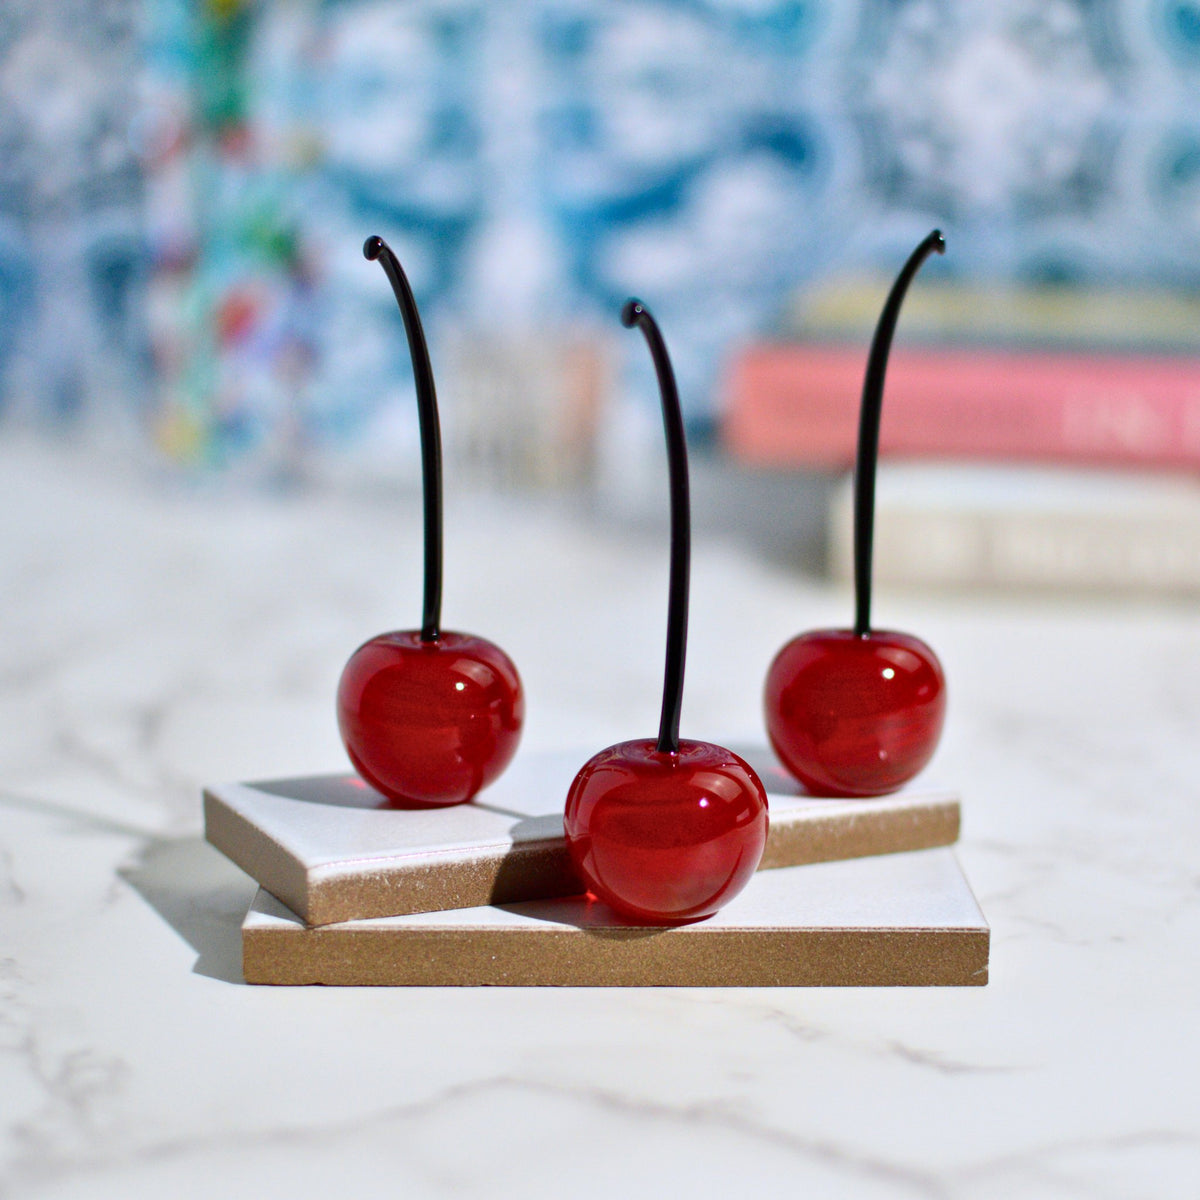 Murano Glass Cherries, Lifelike, Sets of 3 or 5, Made in Italy